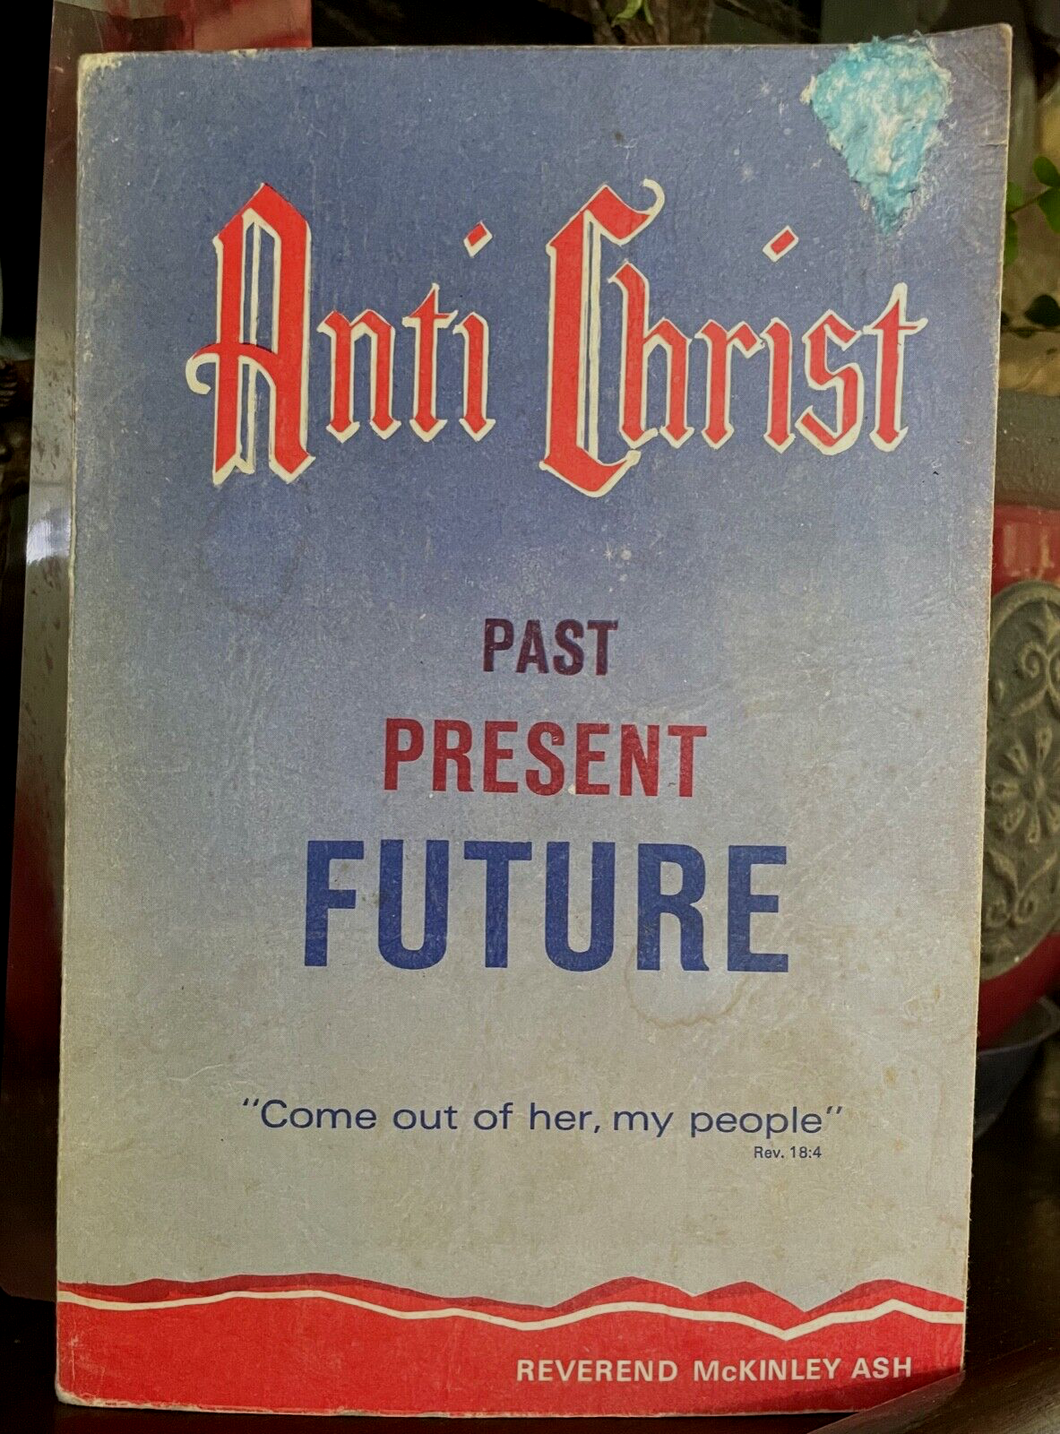 ANTI-CHRIST PAST, PRESENT AND FUTURE - 1st 1967 ARMAGEDDON REVELATIONS END-TIMES